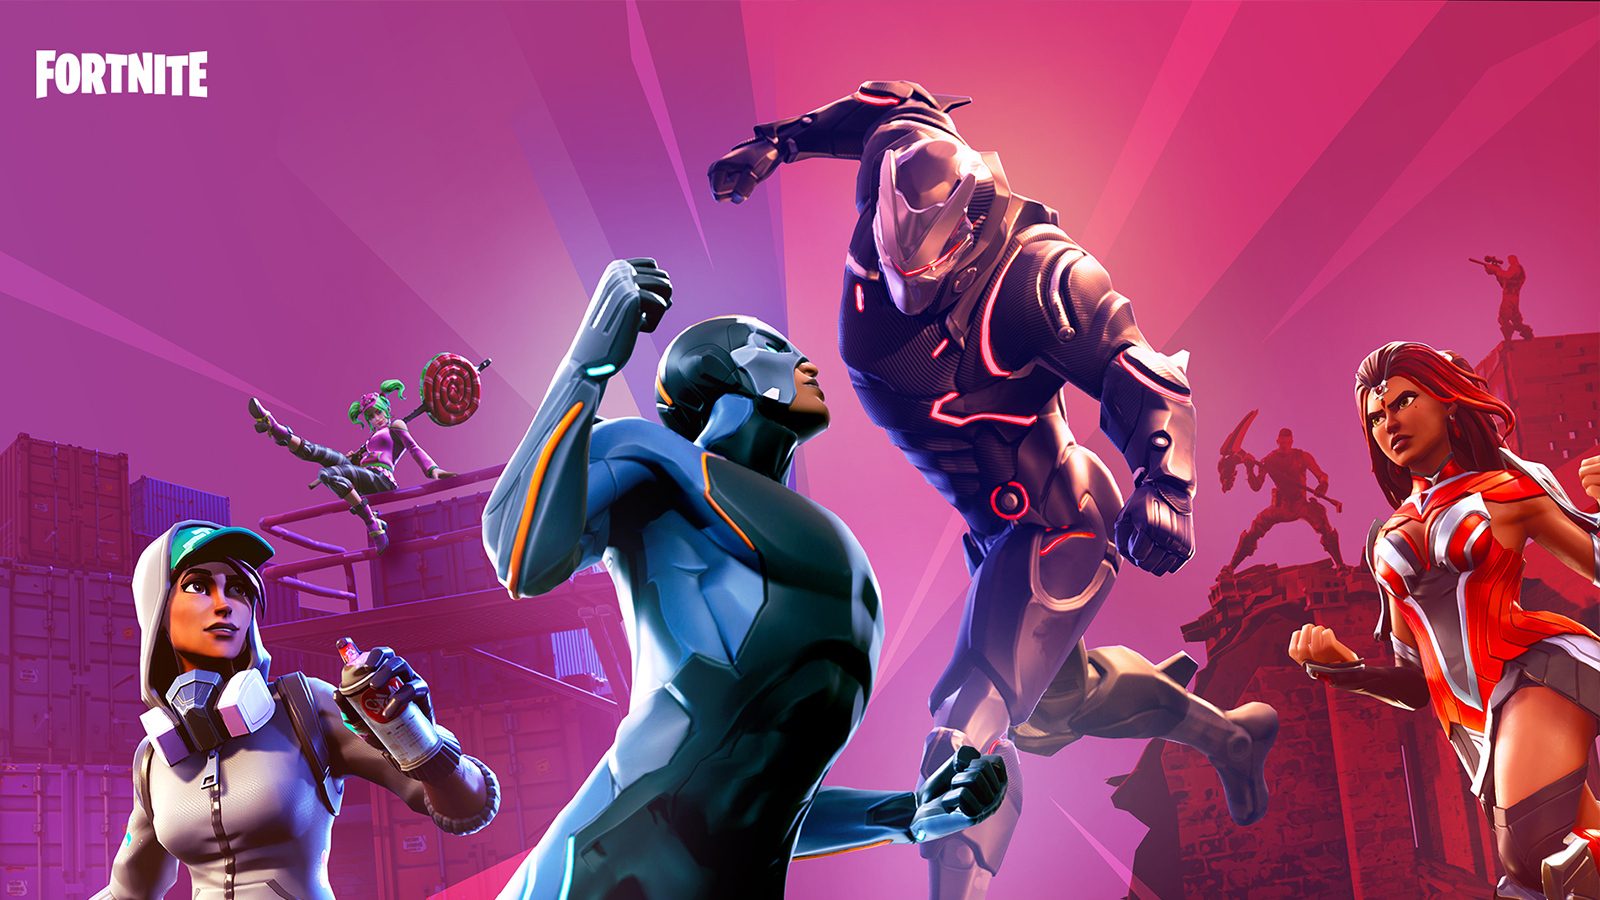 Future Fortnite tournaments might ditch the battle royale format entirely